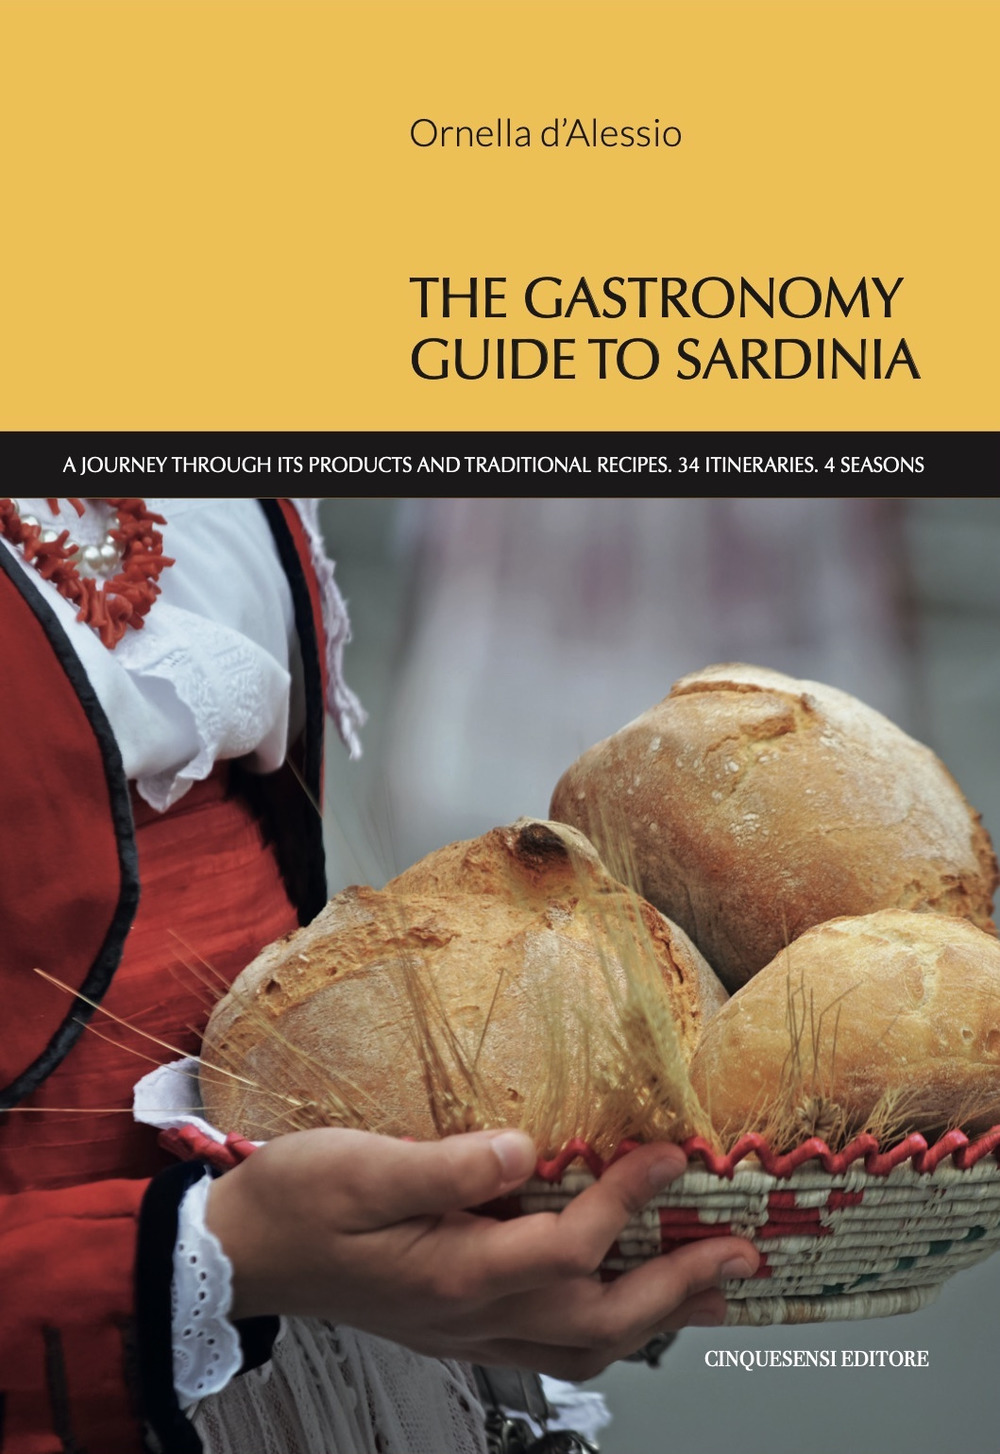 The gastronomy guide to Sardinia. A journey through its products and traditional recipes. 34 itineraries. 4 seasons